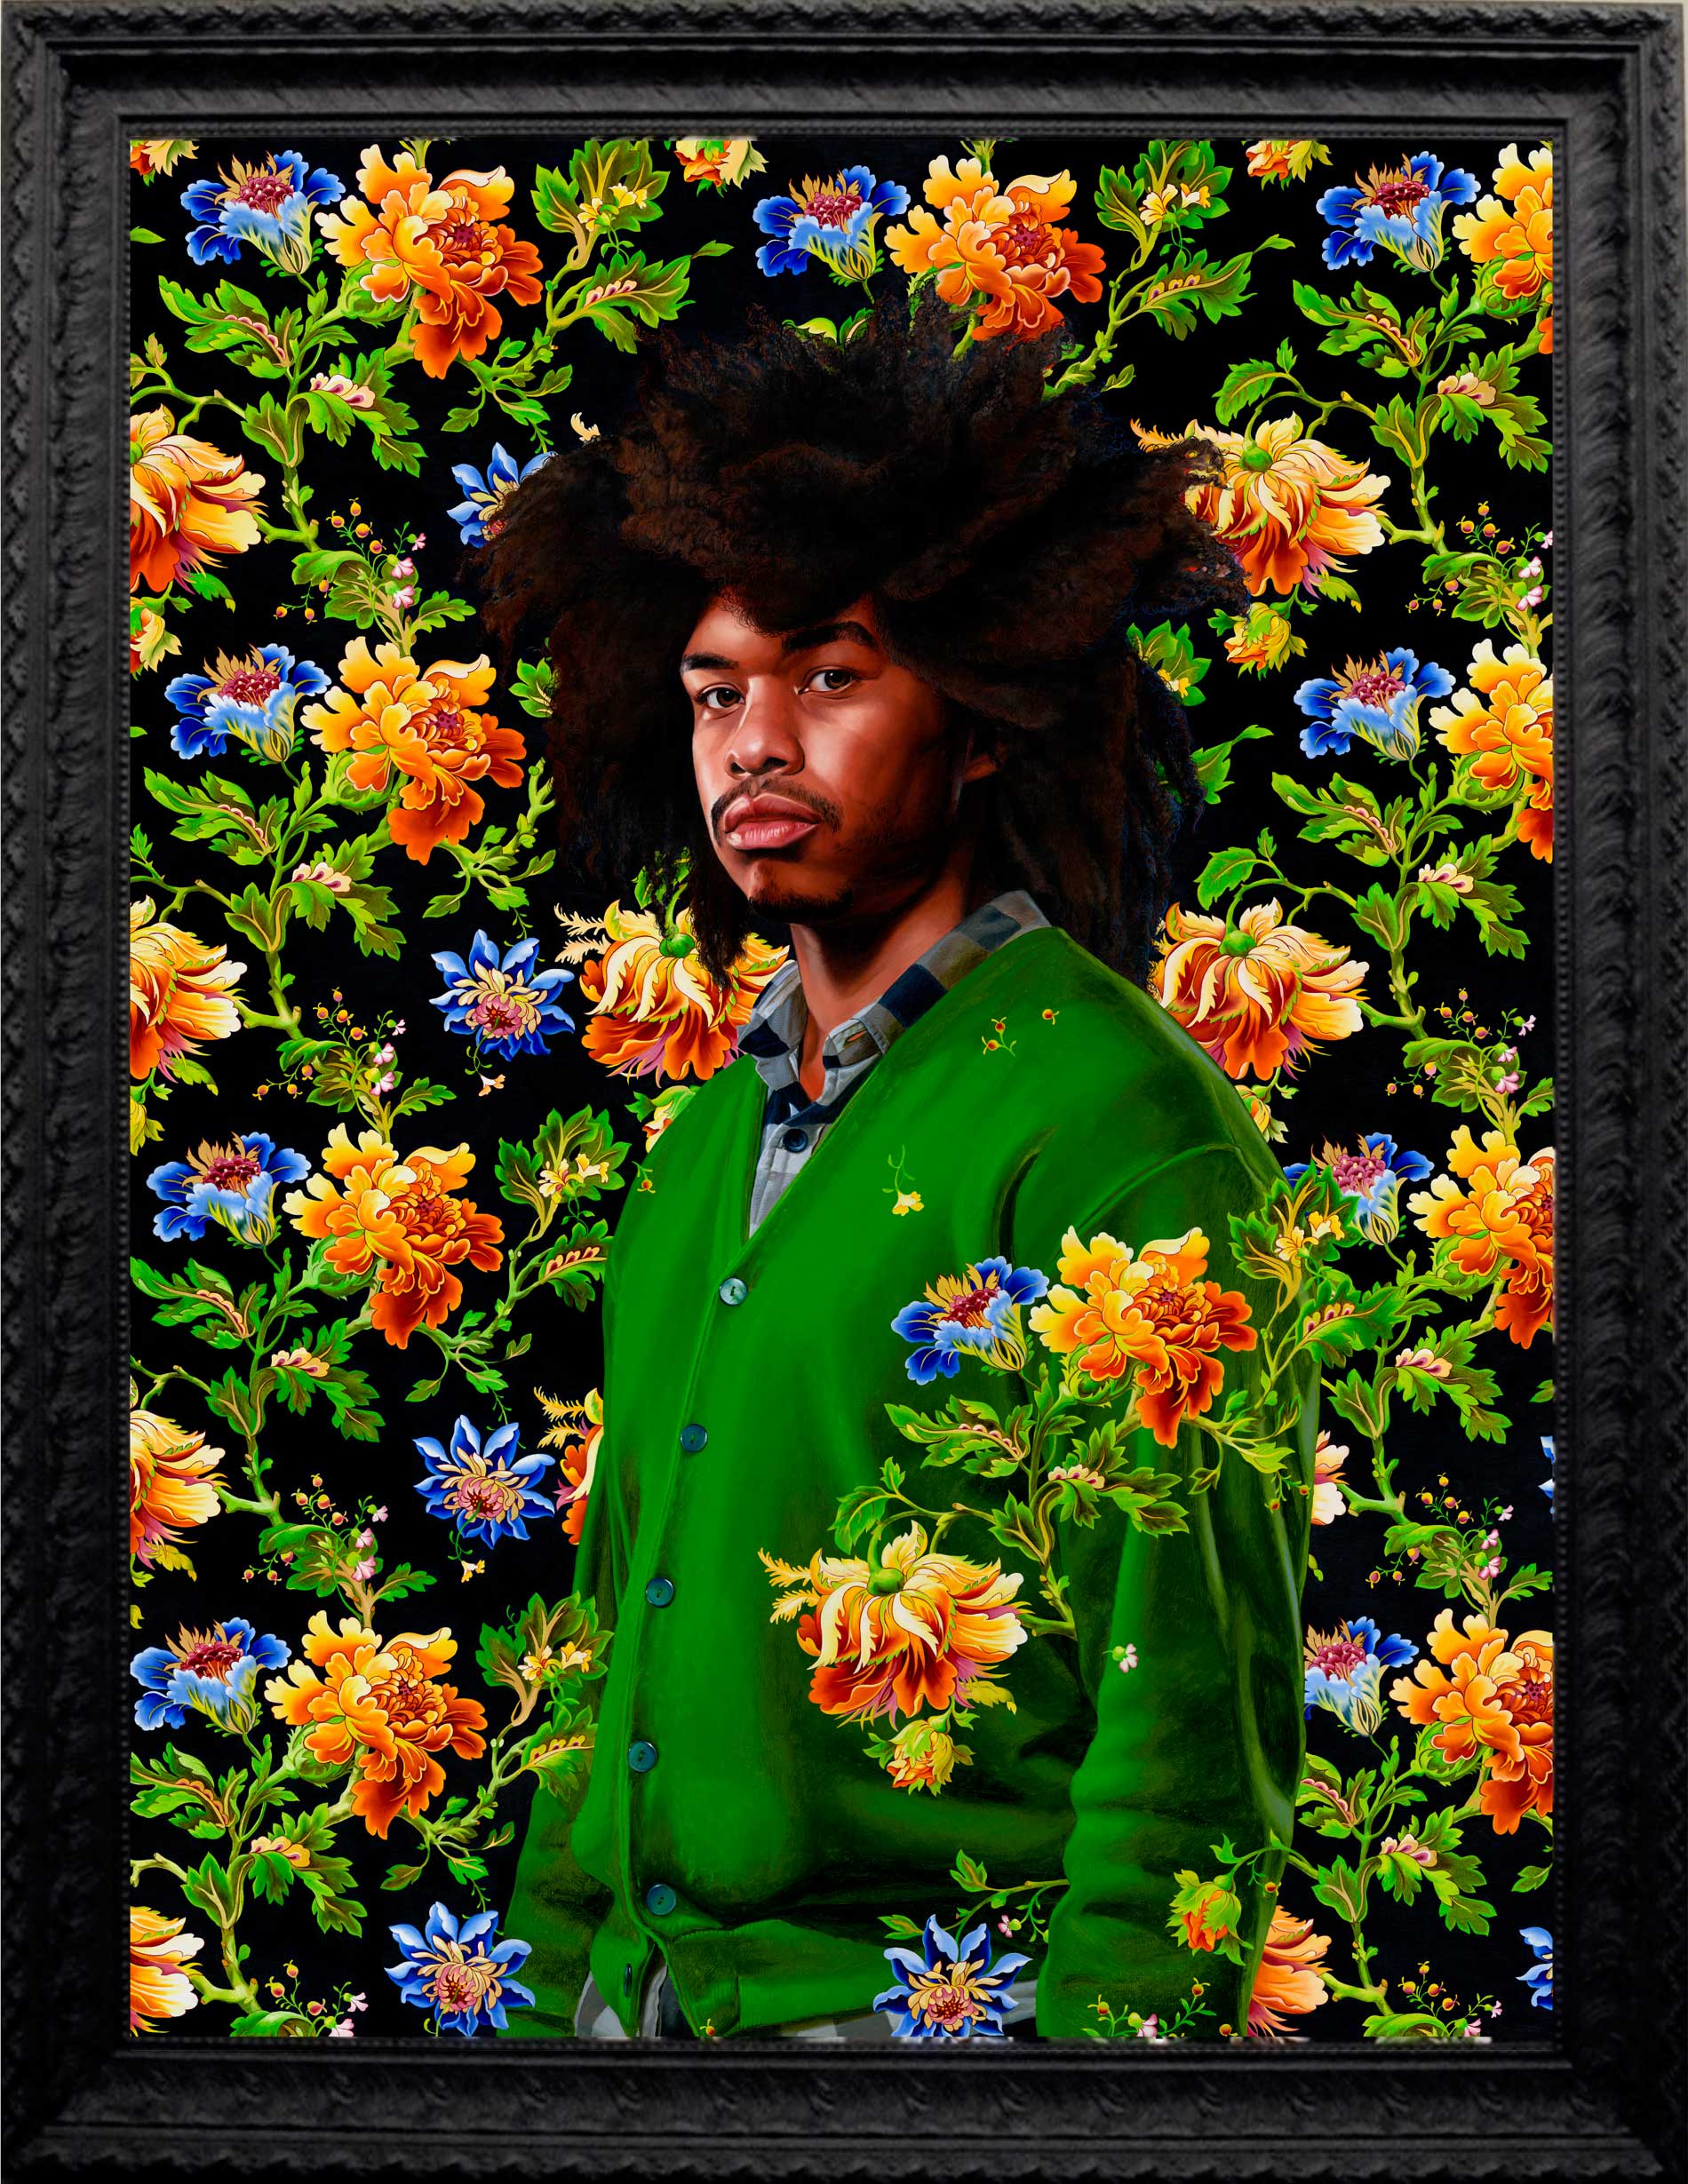 Kehinde Wiley | Selected Works: 2012 | Terence Nance, 2012, Oil on Canvas. | 5